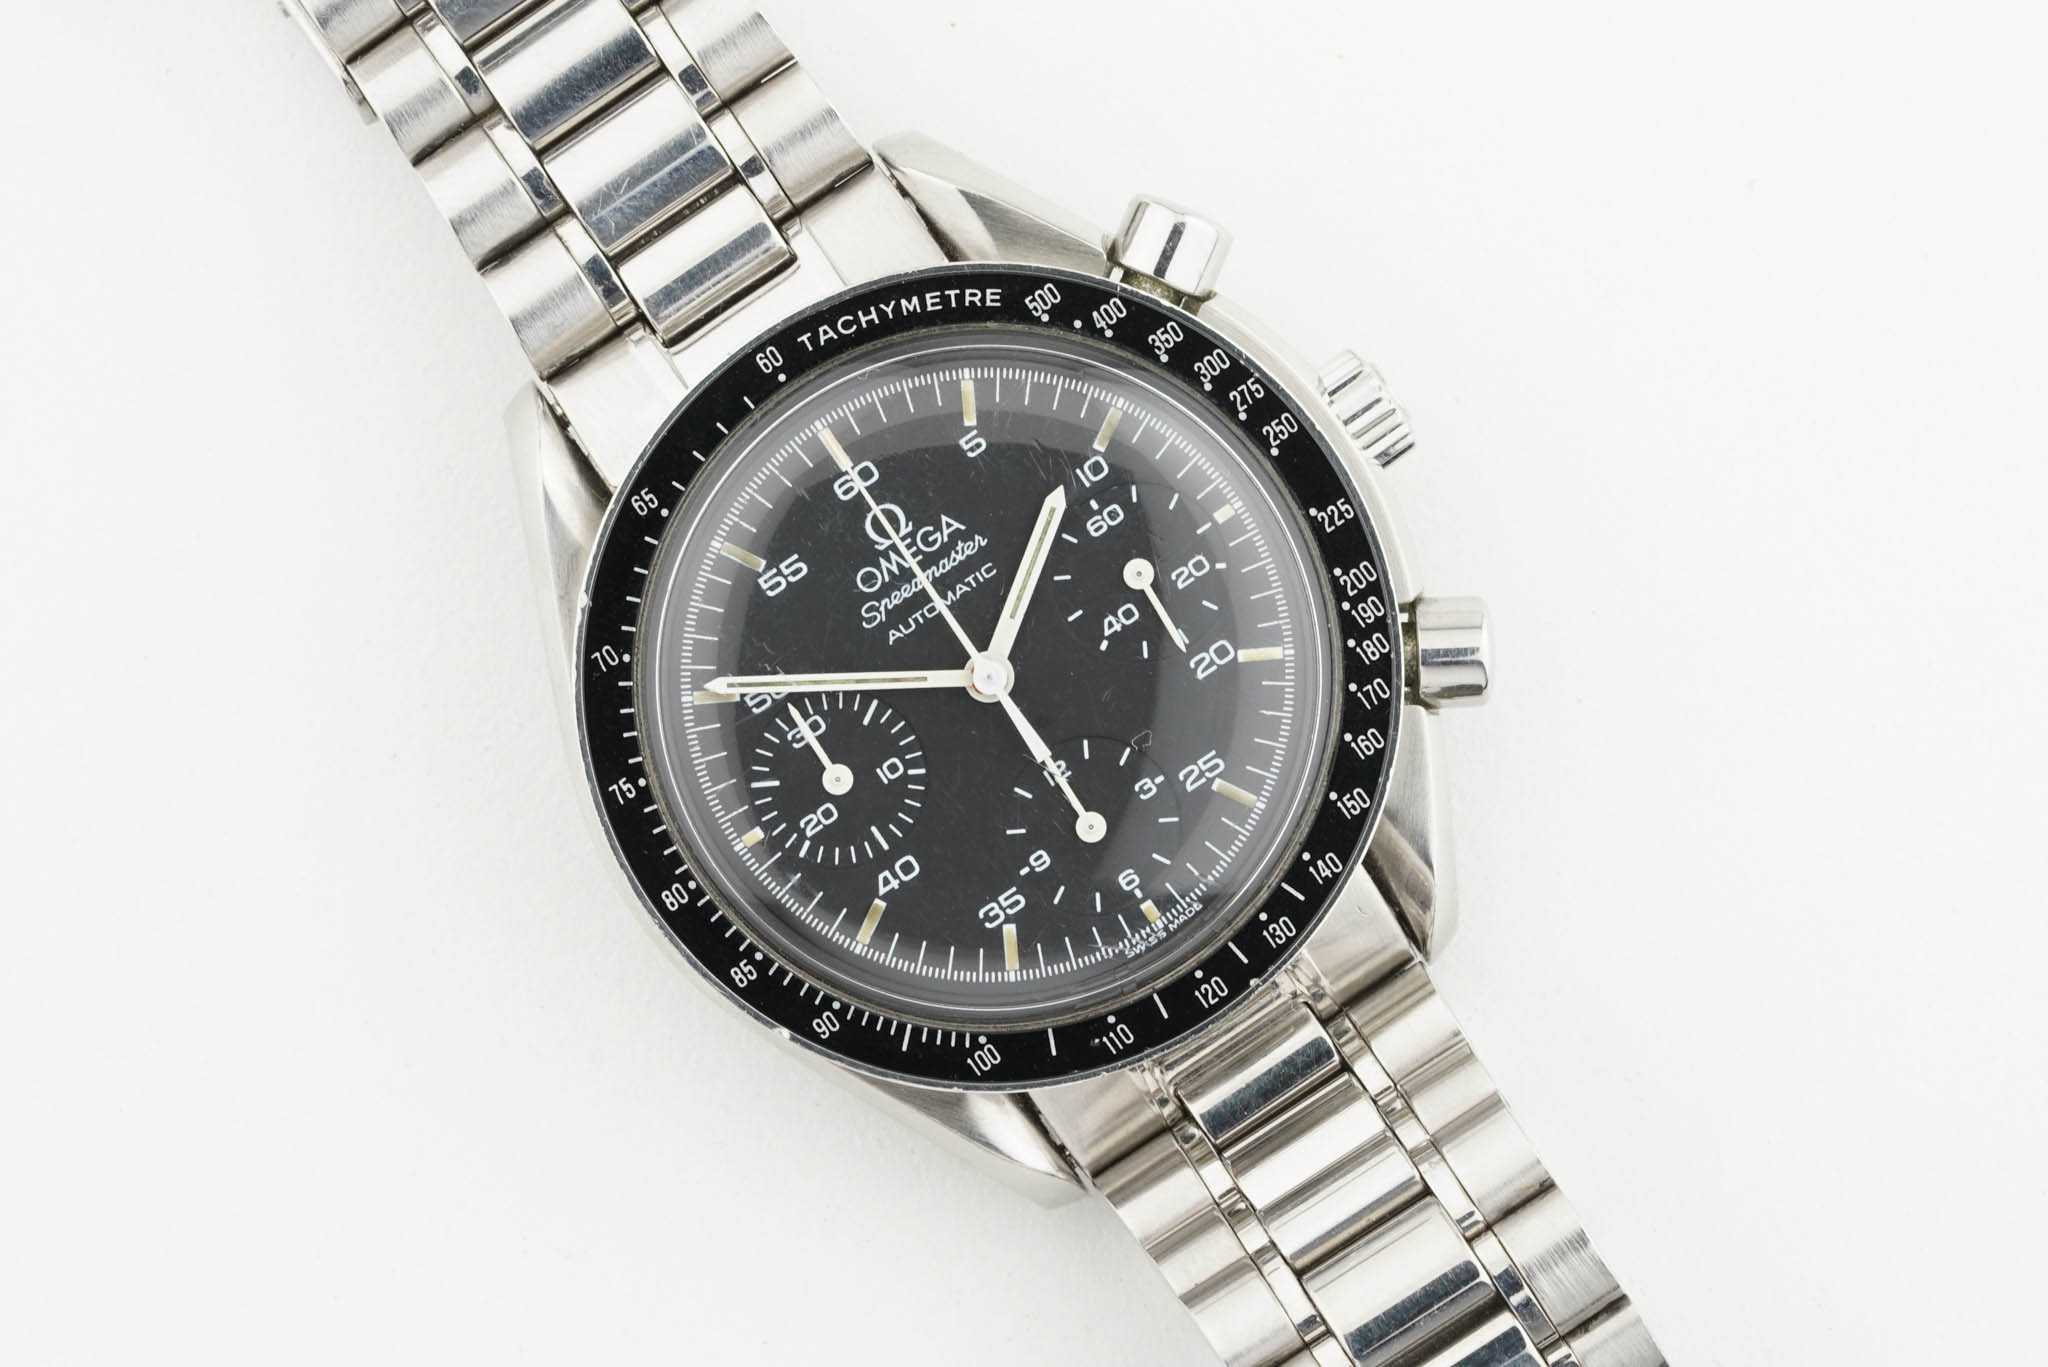 OMEGA SPEEDMASTER REDUCED W/ GUARANTEE CARD, circular black dial with hour markers and hands, 39mm